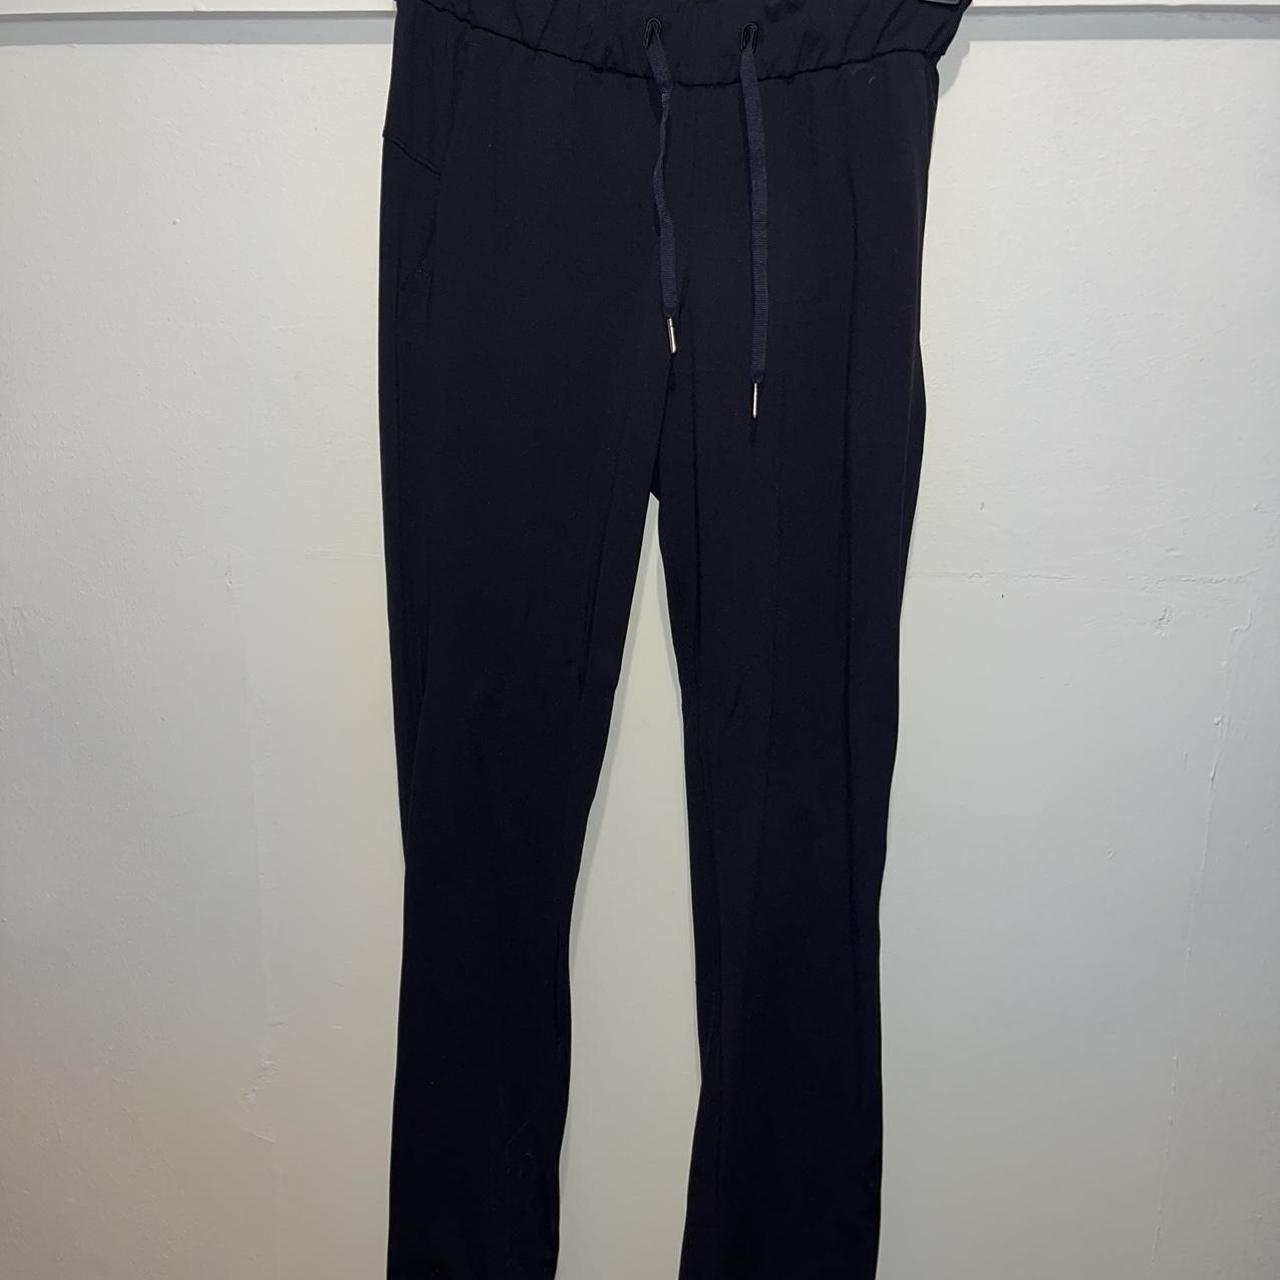 Lululemon stretch High Rise pants size 4 In great - Depop